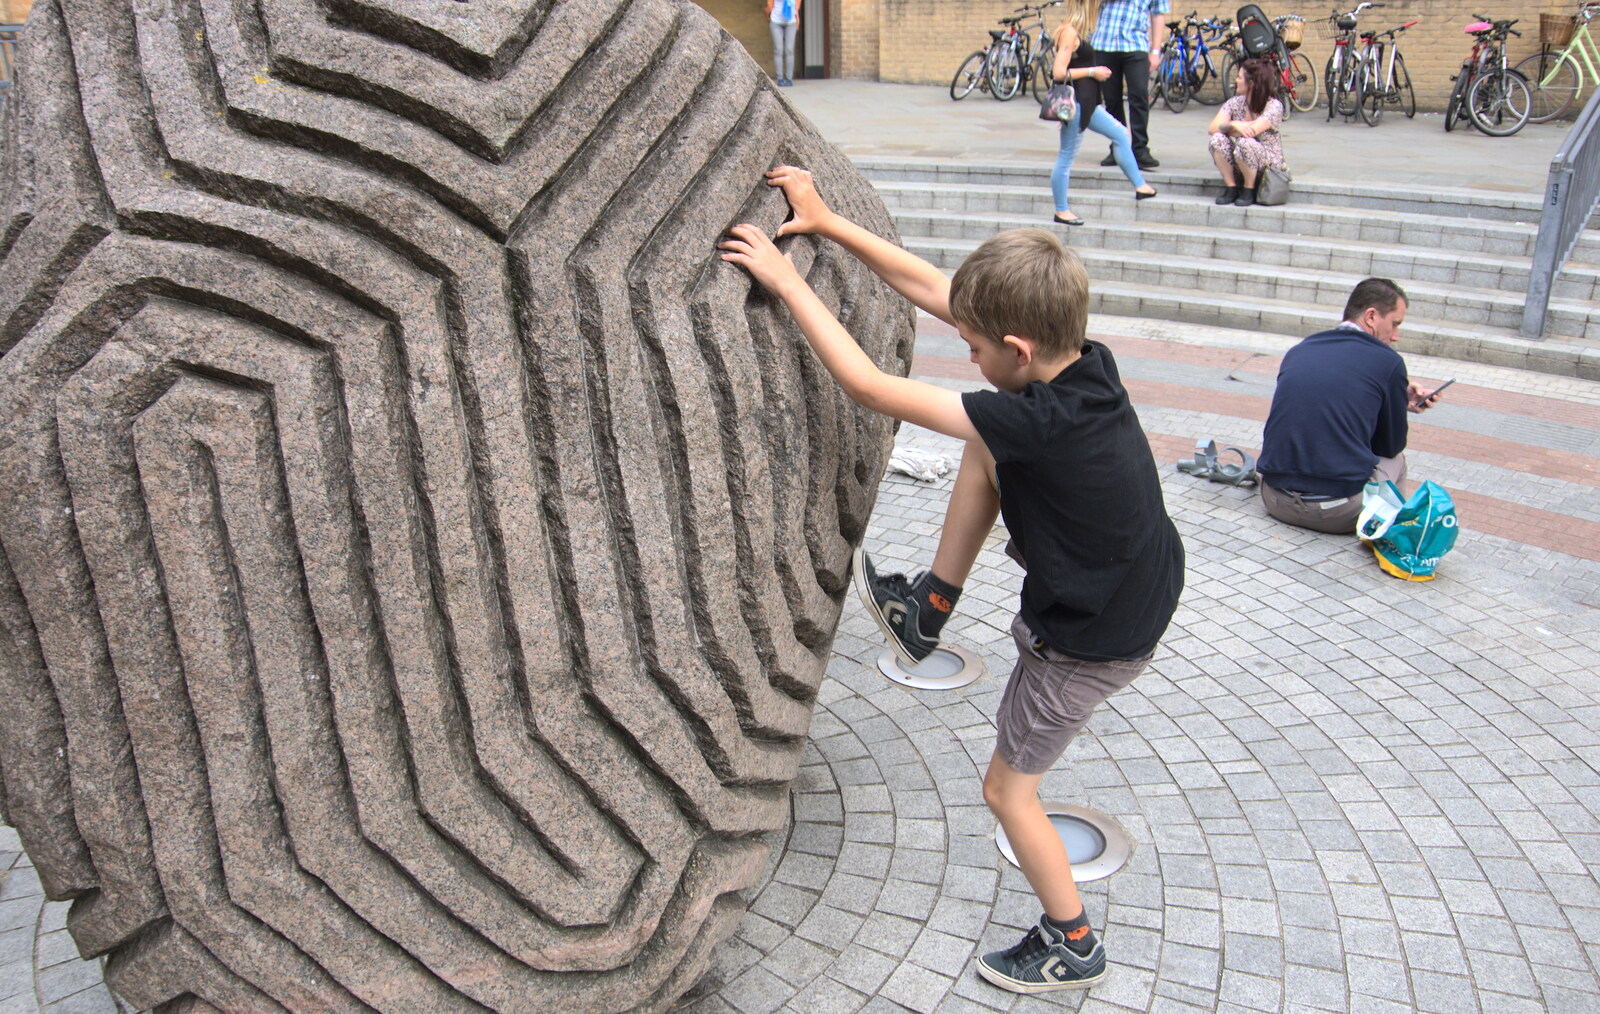 Fred climbs on a sculpture outside Carluccio's from The Retro Computer Festival, Centre For Computing History, Cambridge - 15th September 2018